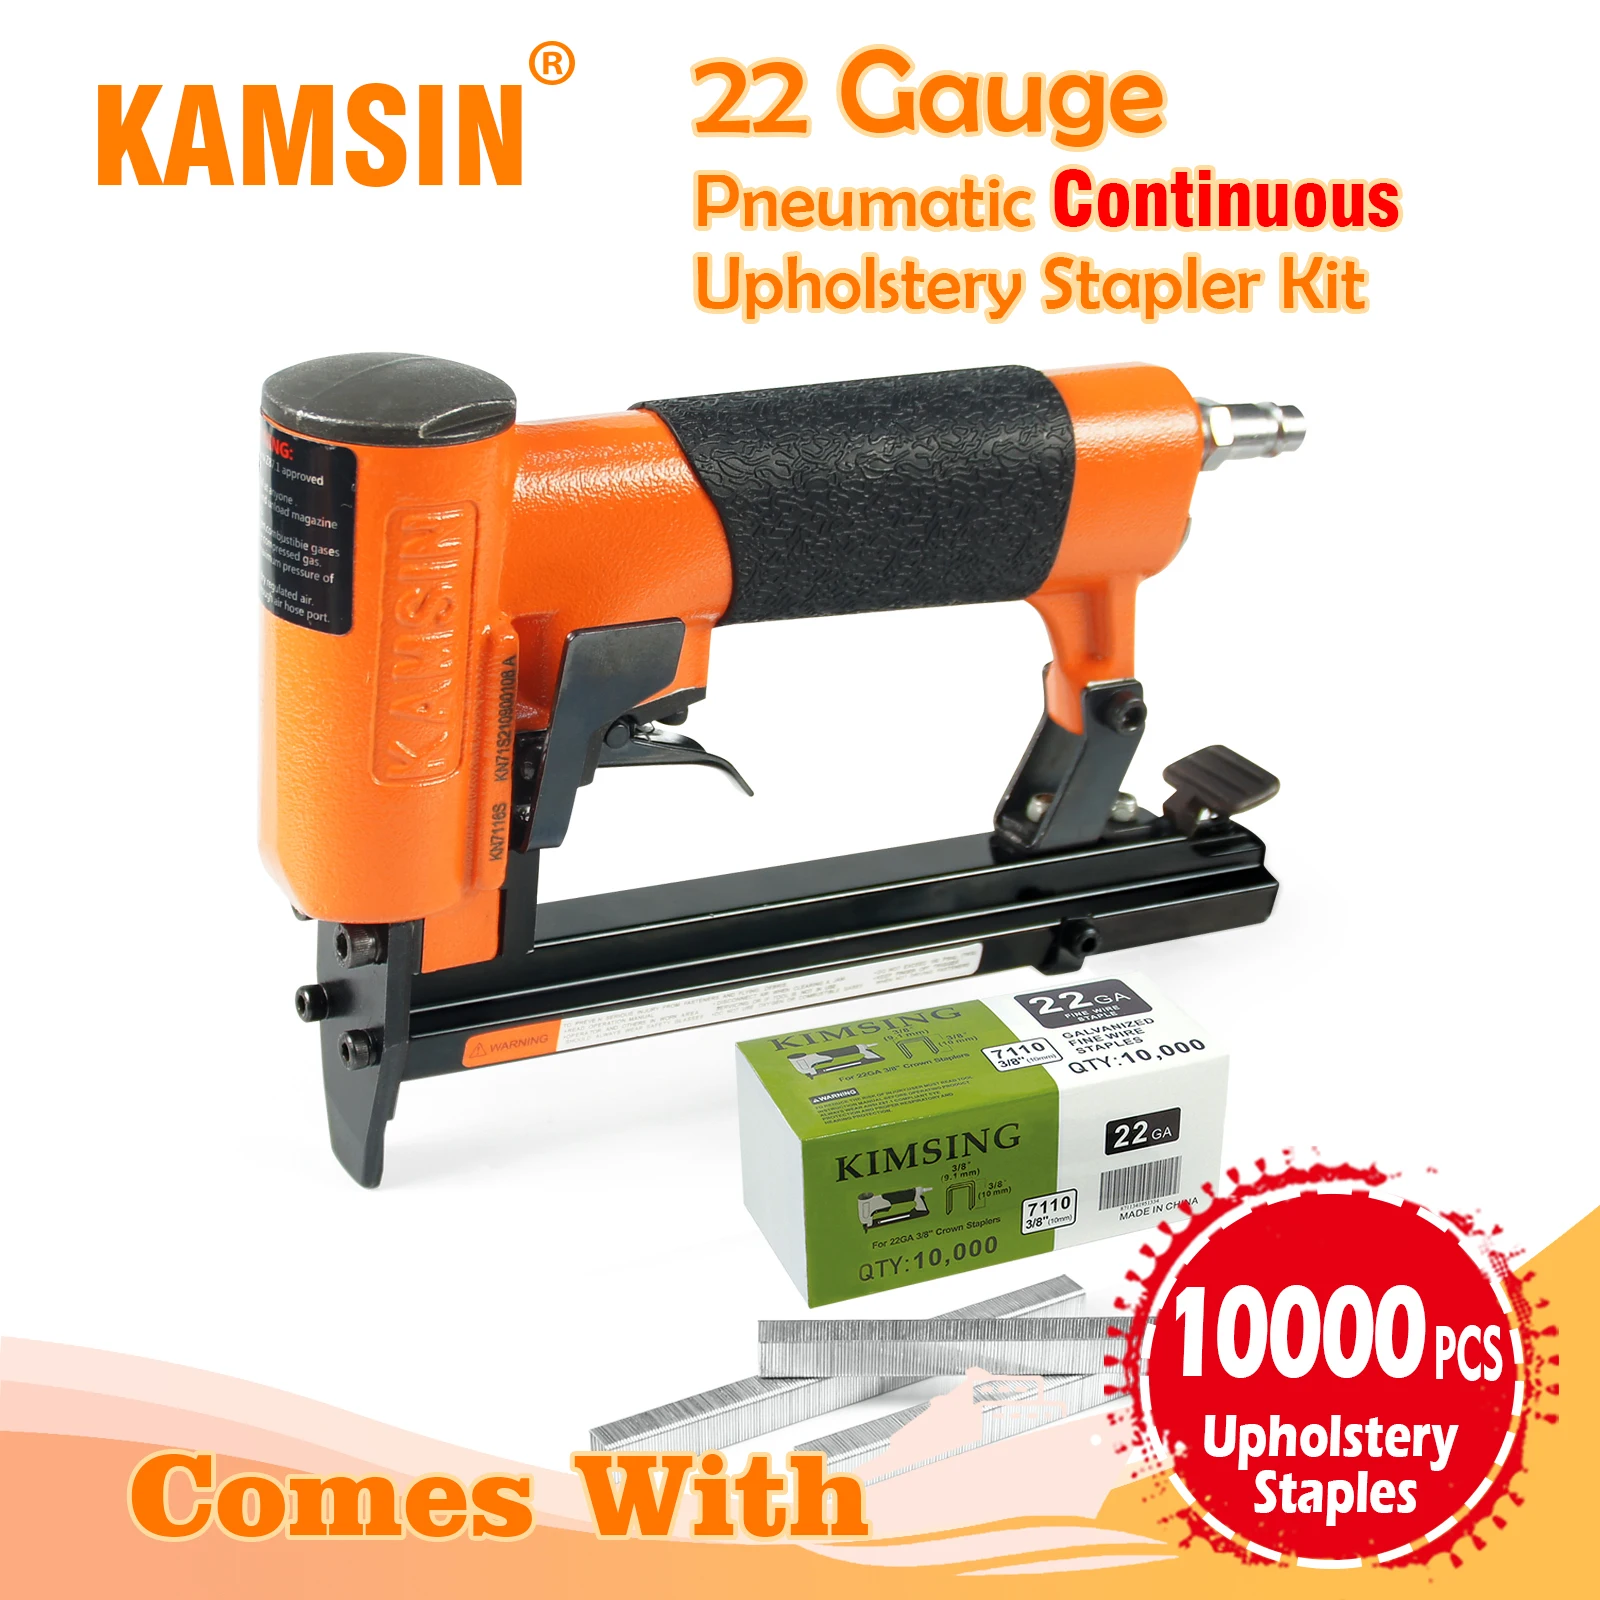 

KAMSIN 22 Gauge KN7116S Pneumatic Continuous Firing Upholstery Stapler Kit Comes with 6mm or 10mm Length 9mm Crown Staples